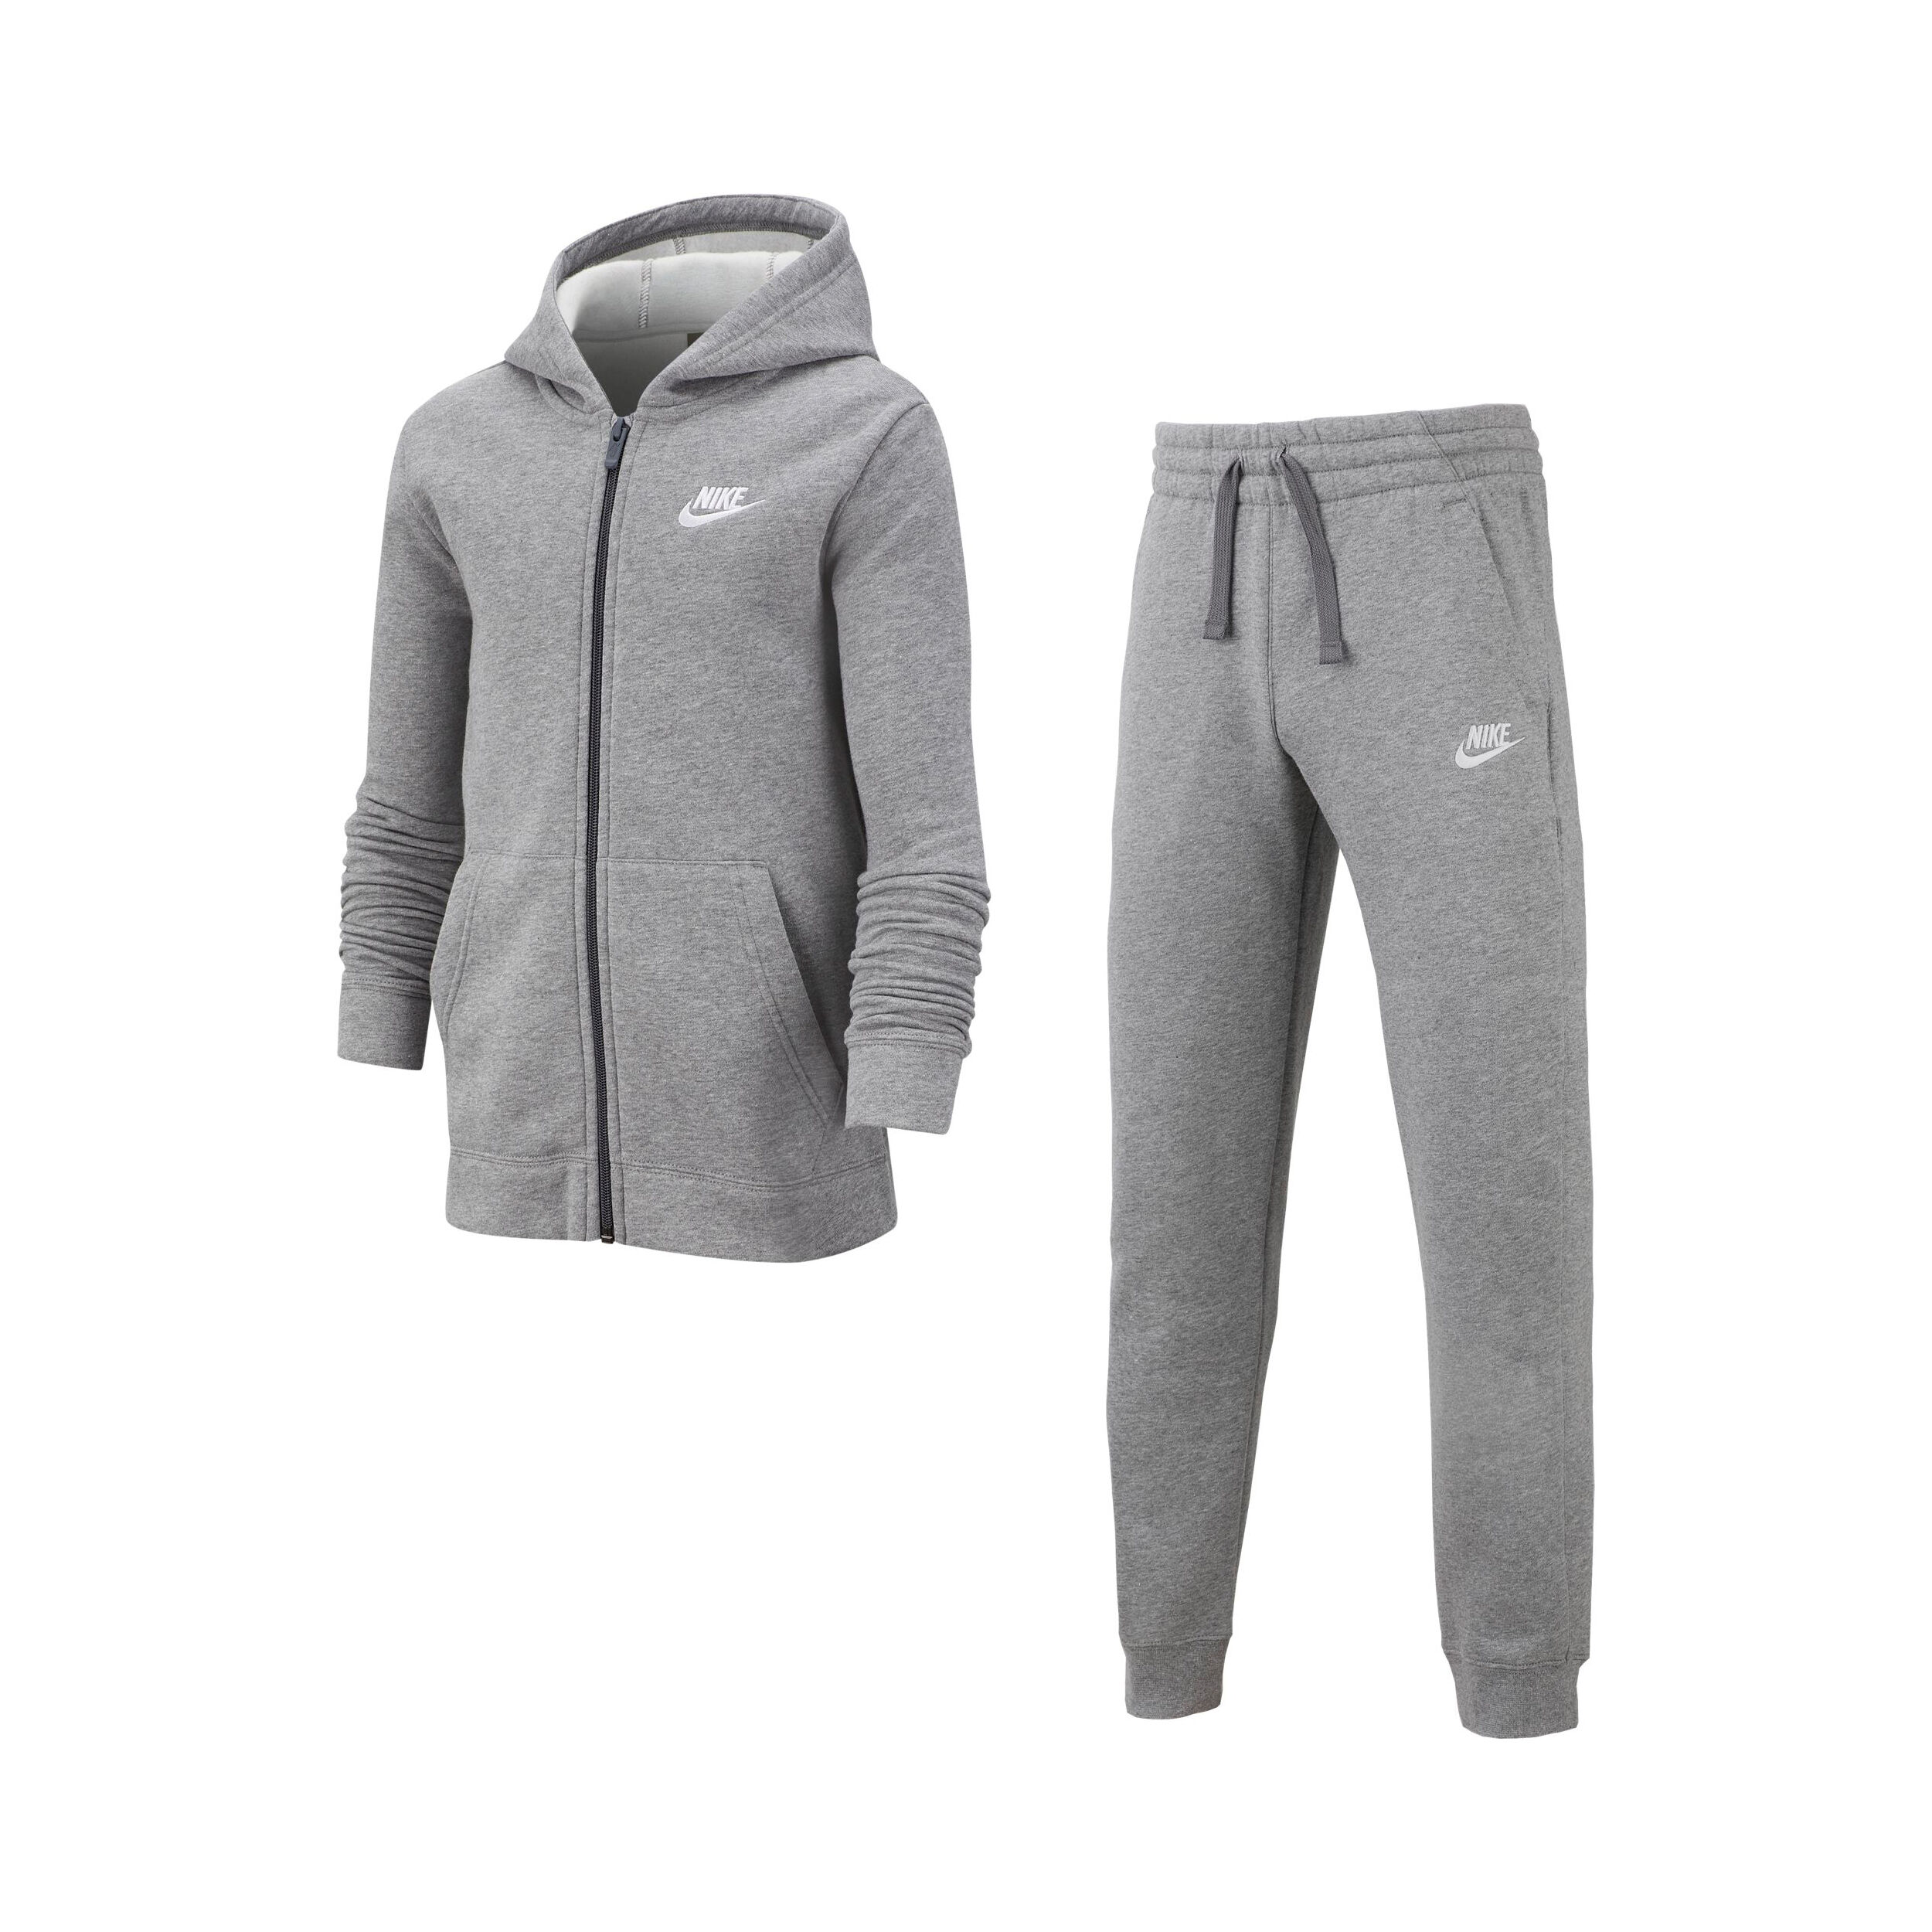 grey and white nike joggers